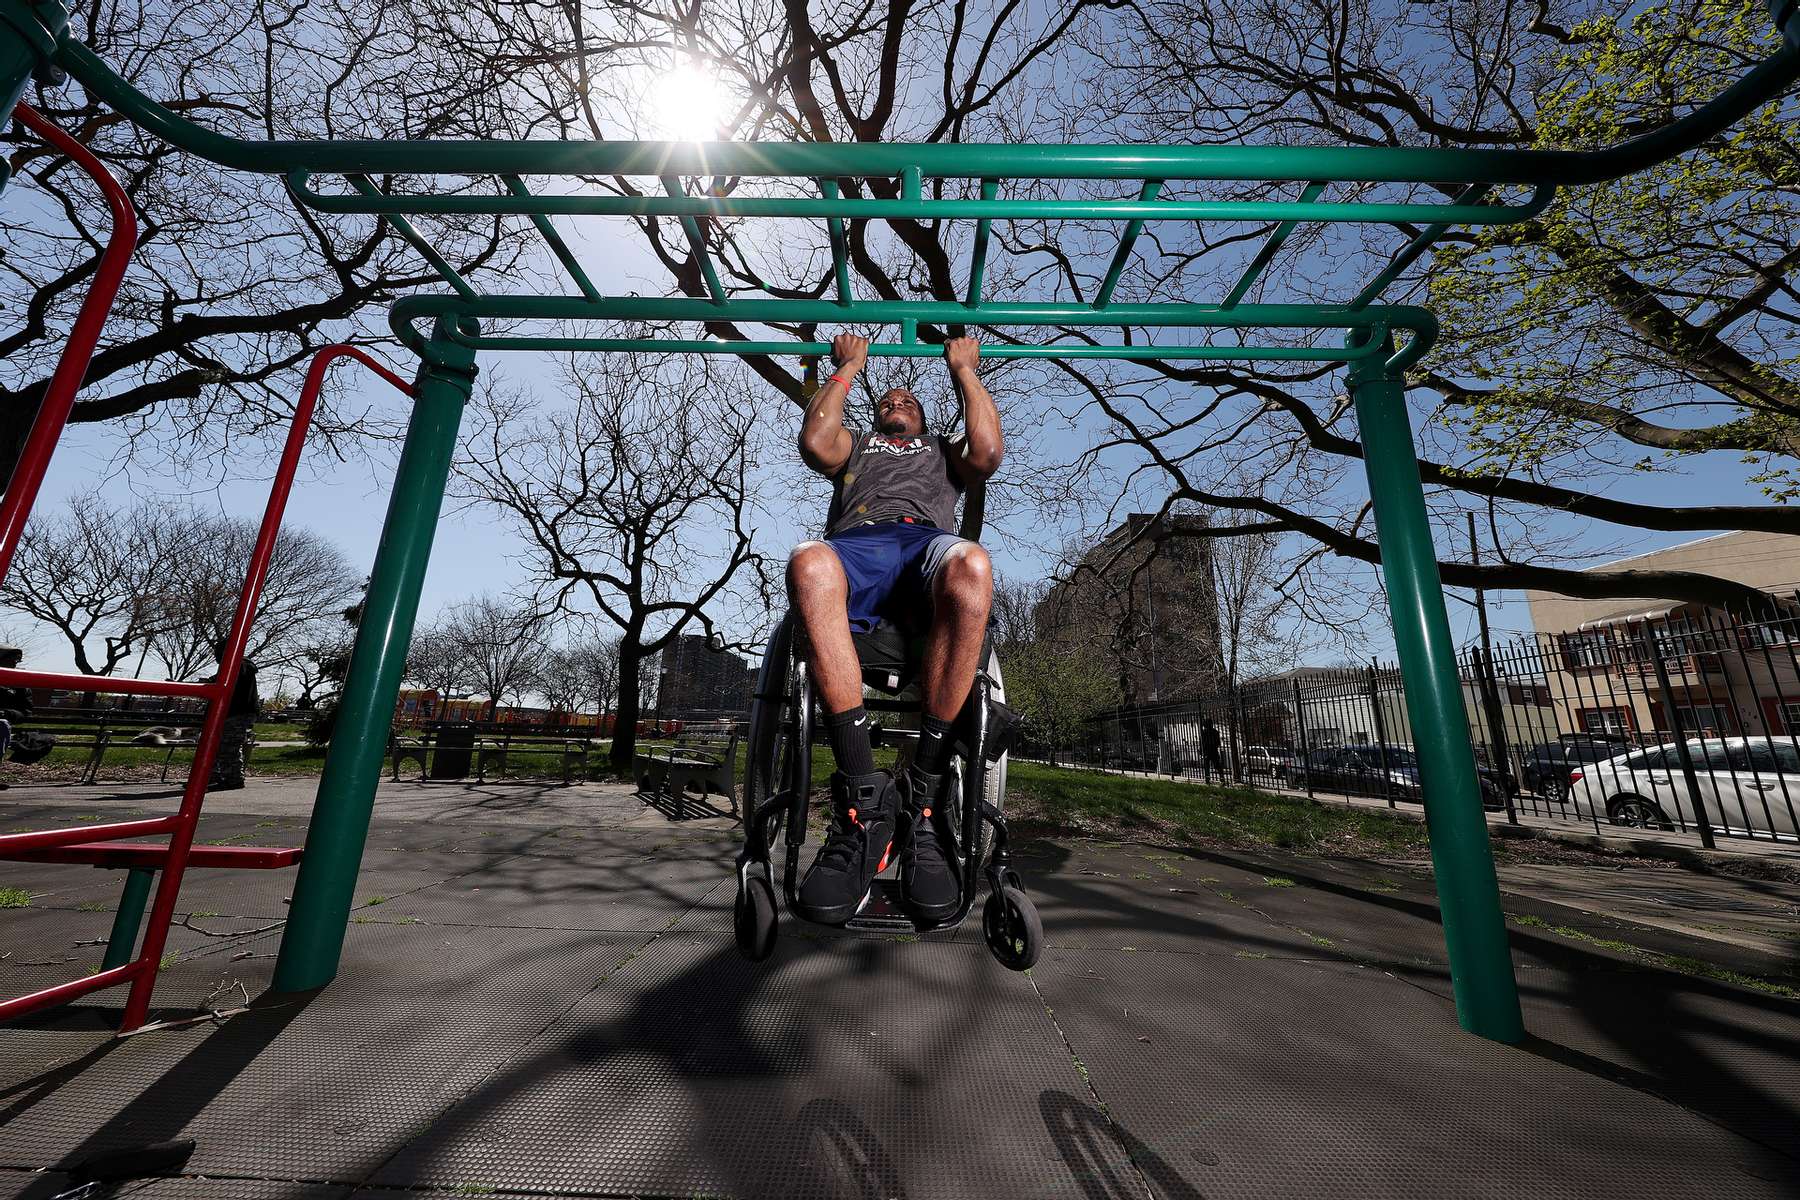 Team USA Para Powerlifter Garrison Redd trains in his wheelchair doing chin-ups in Robert E. Venable Park  on April 06, 2021 in Brooklyn, New York.   